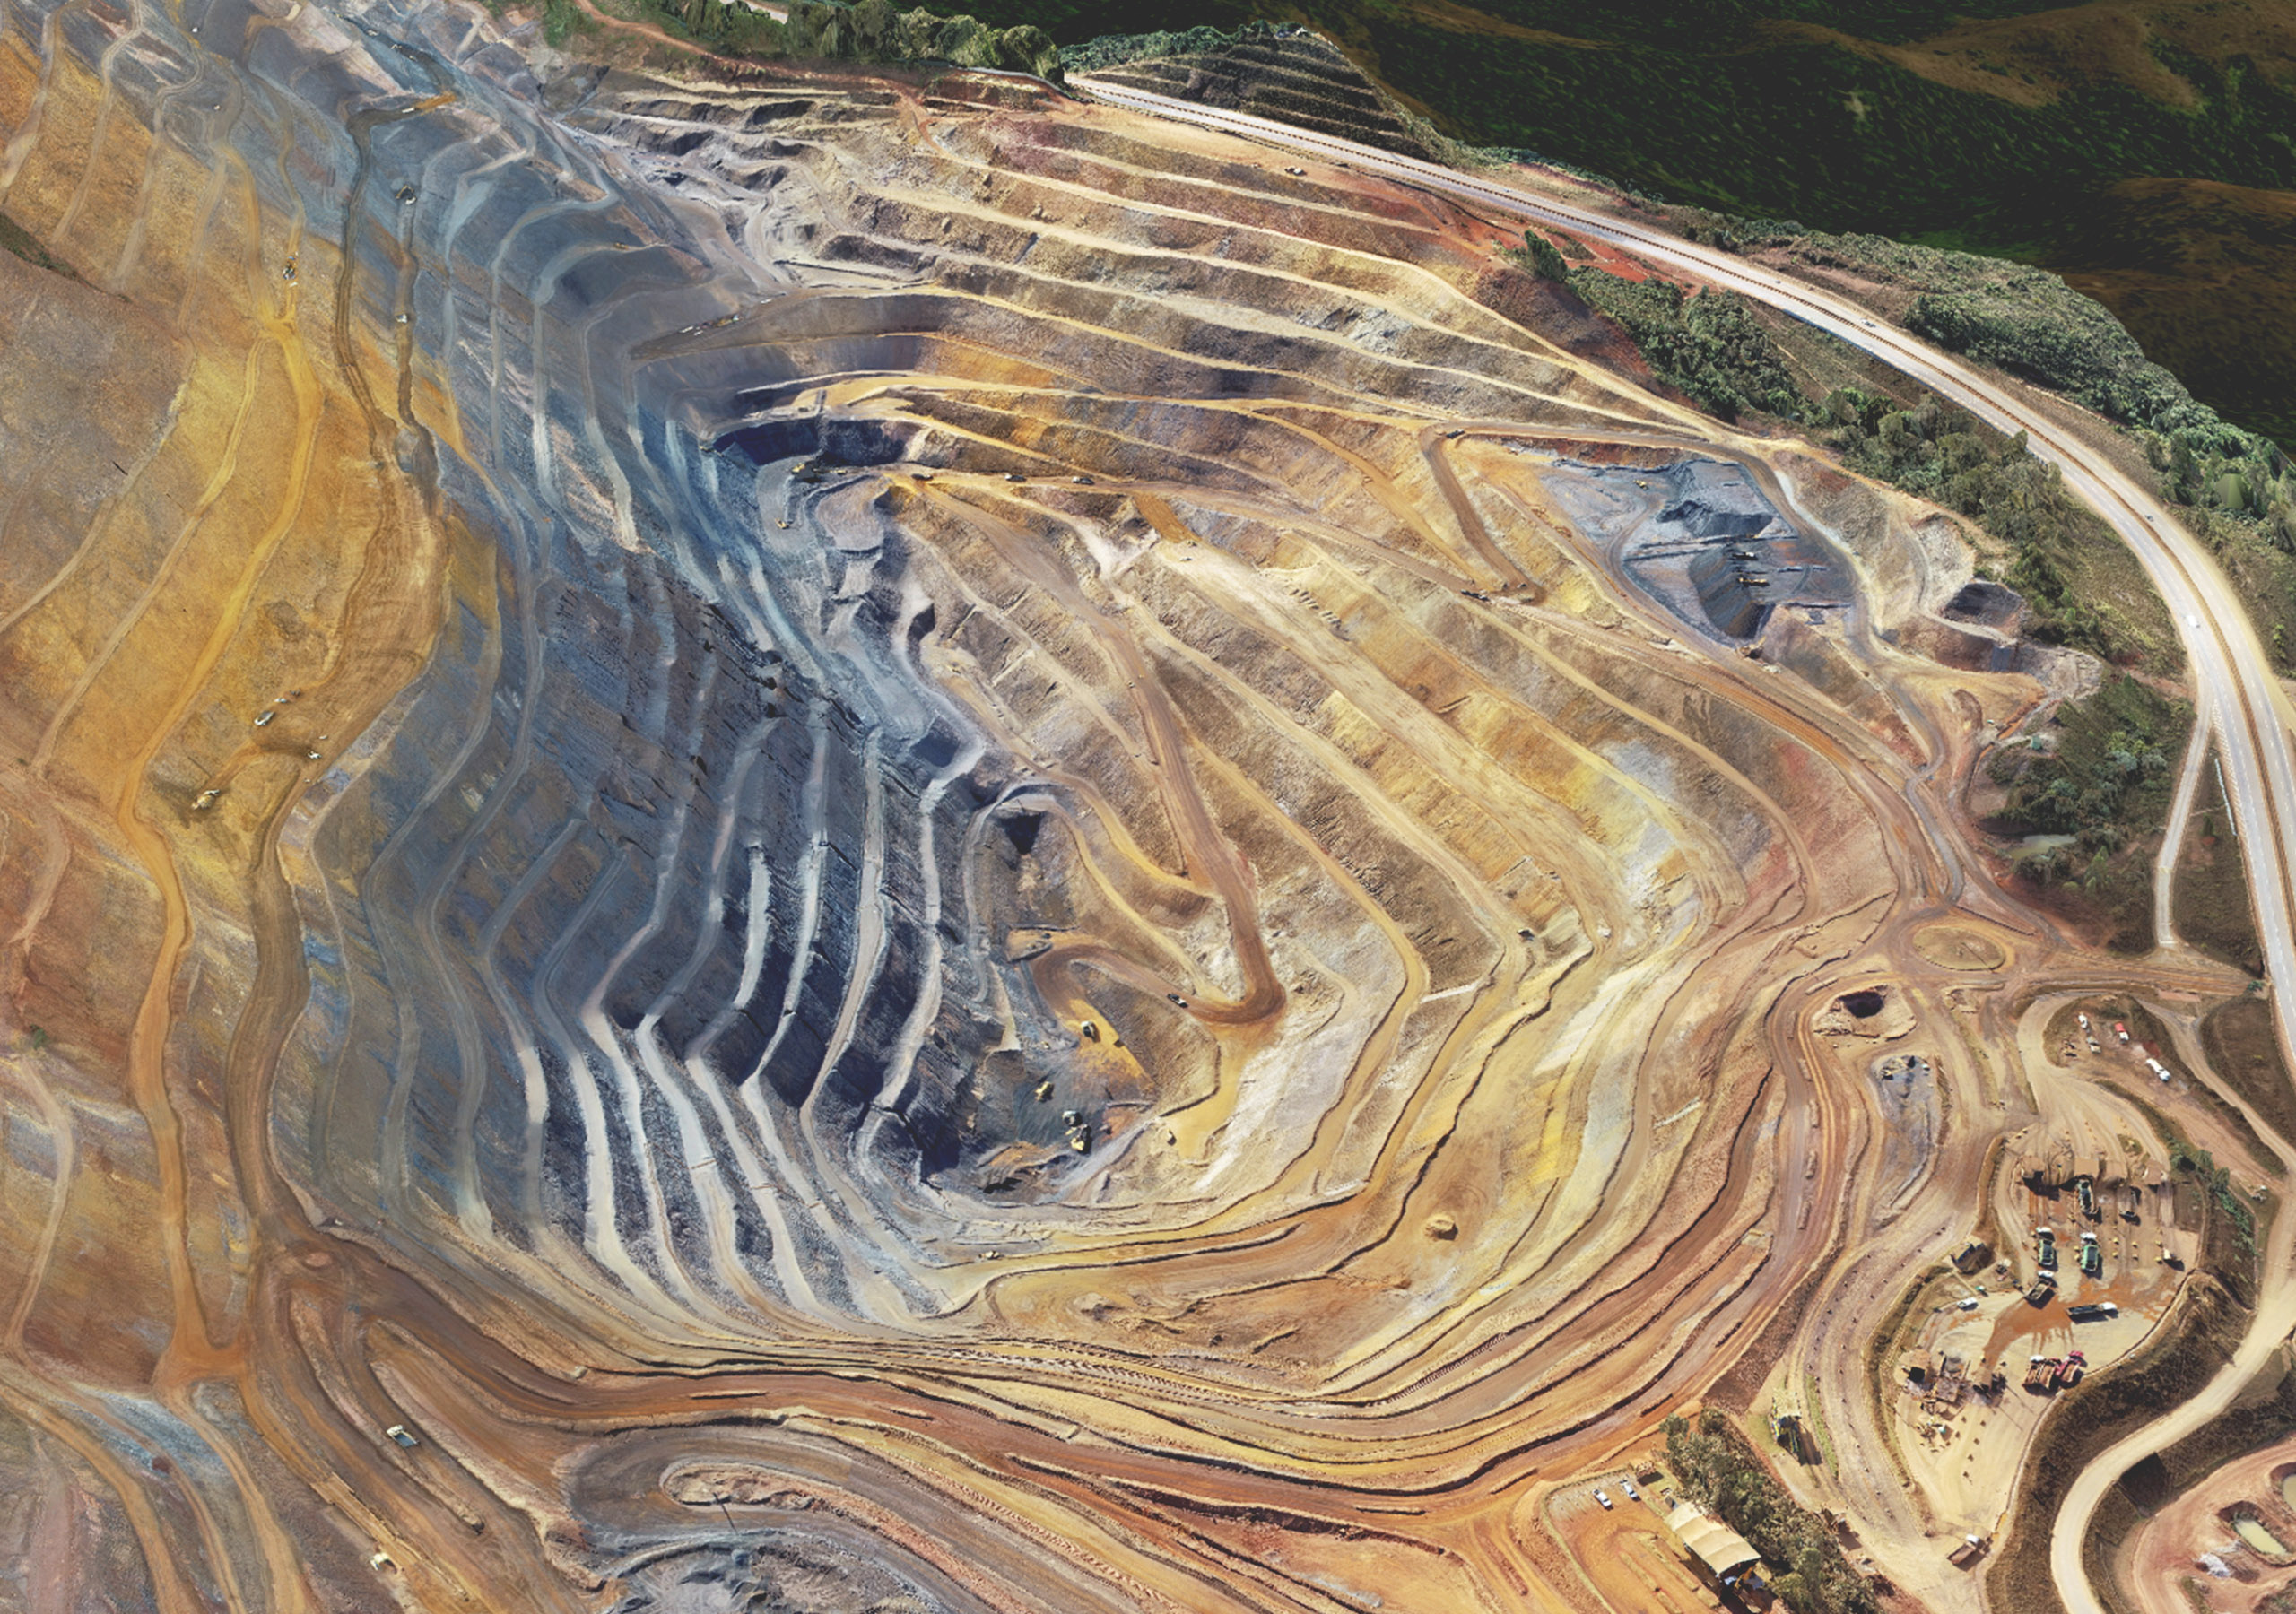 A drone image of a large mining site with terraced paths leading down the side of a mountain into an open pit